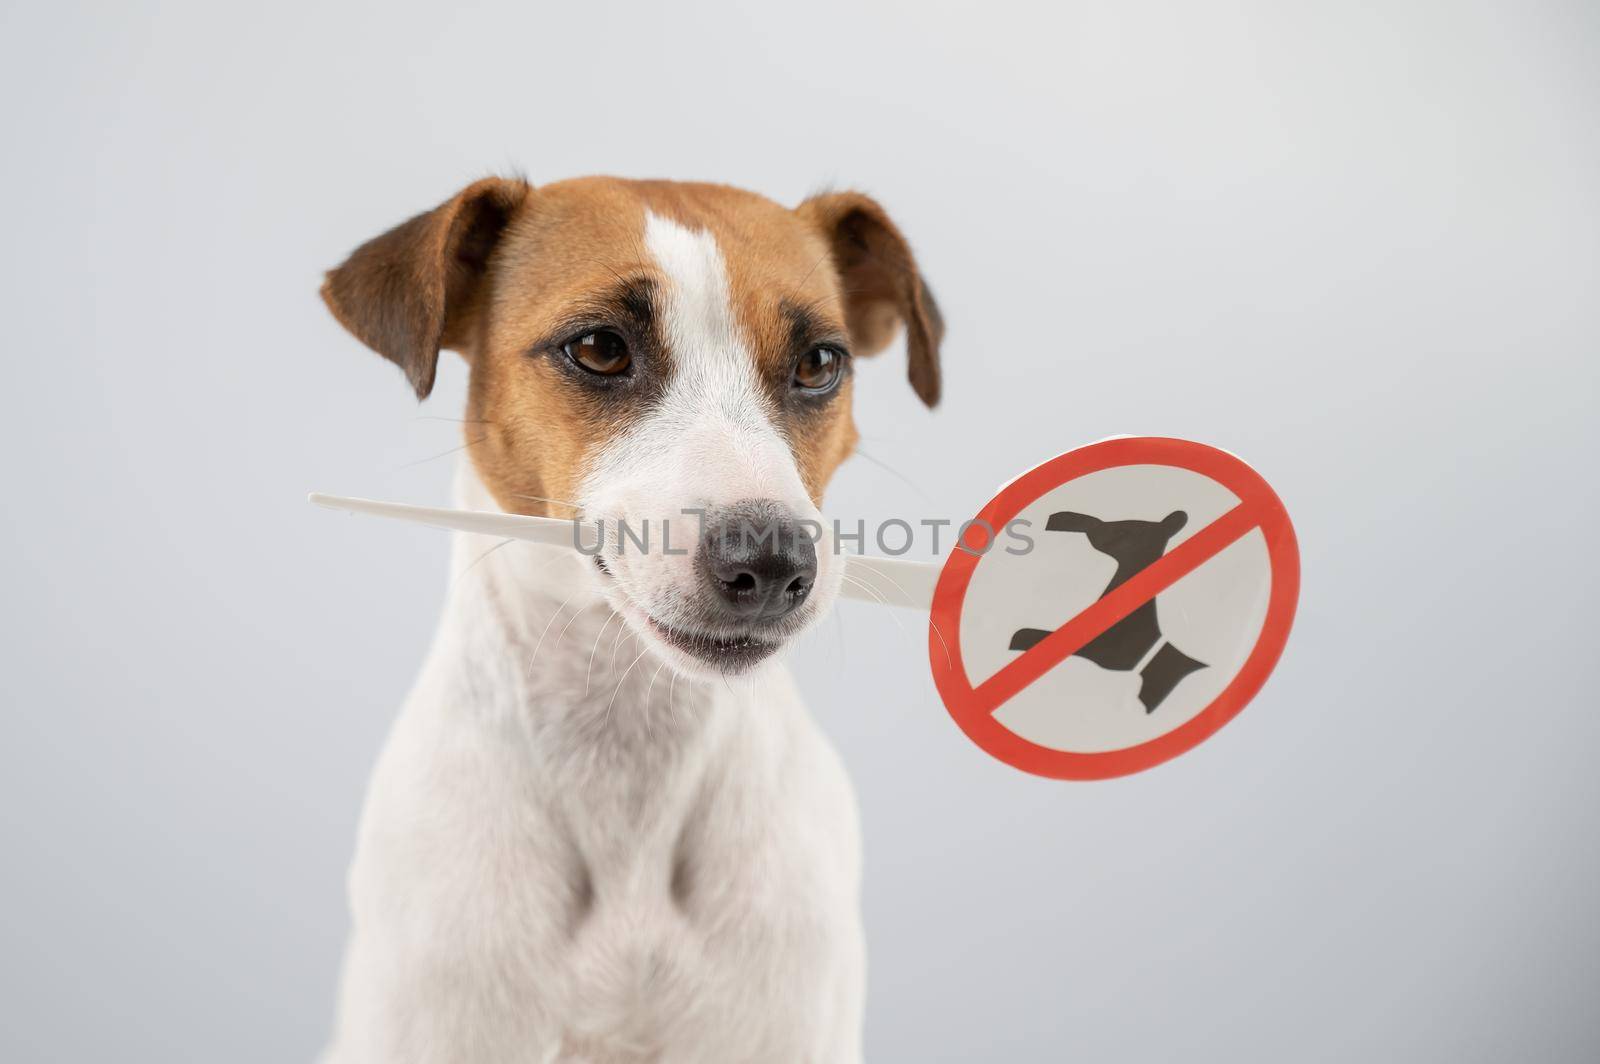 Dog jack russell terrier holding a sign dogs are not allowed on a white background. by mrwed54